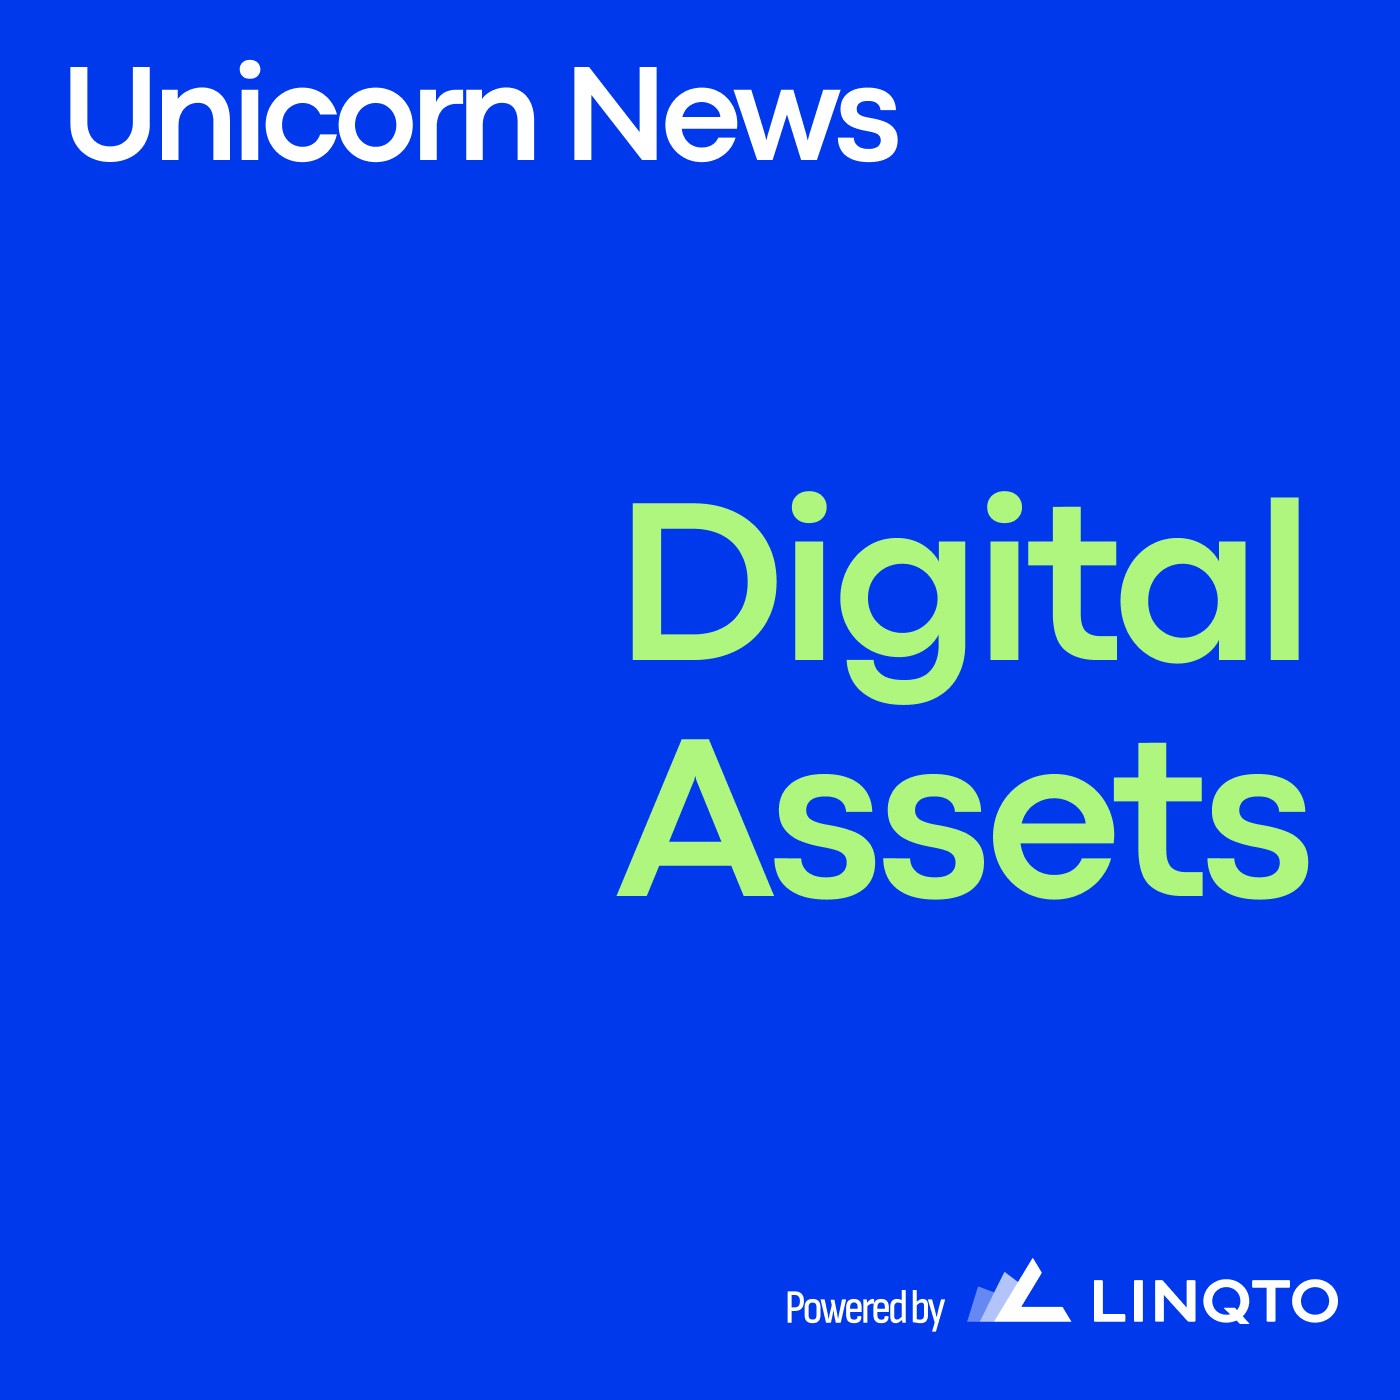 Unicorn News: The Latest in Digital Assets